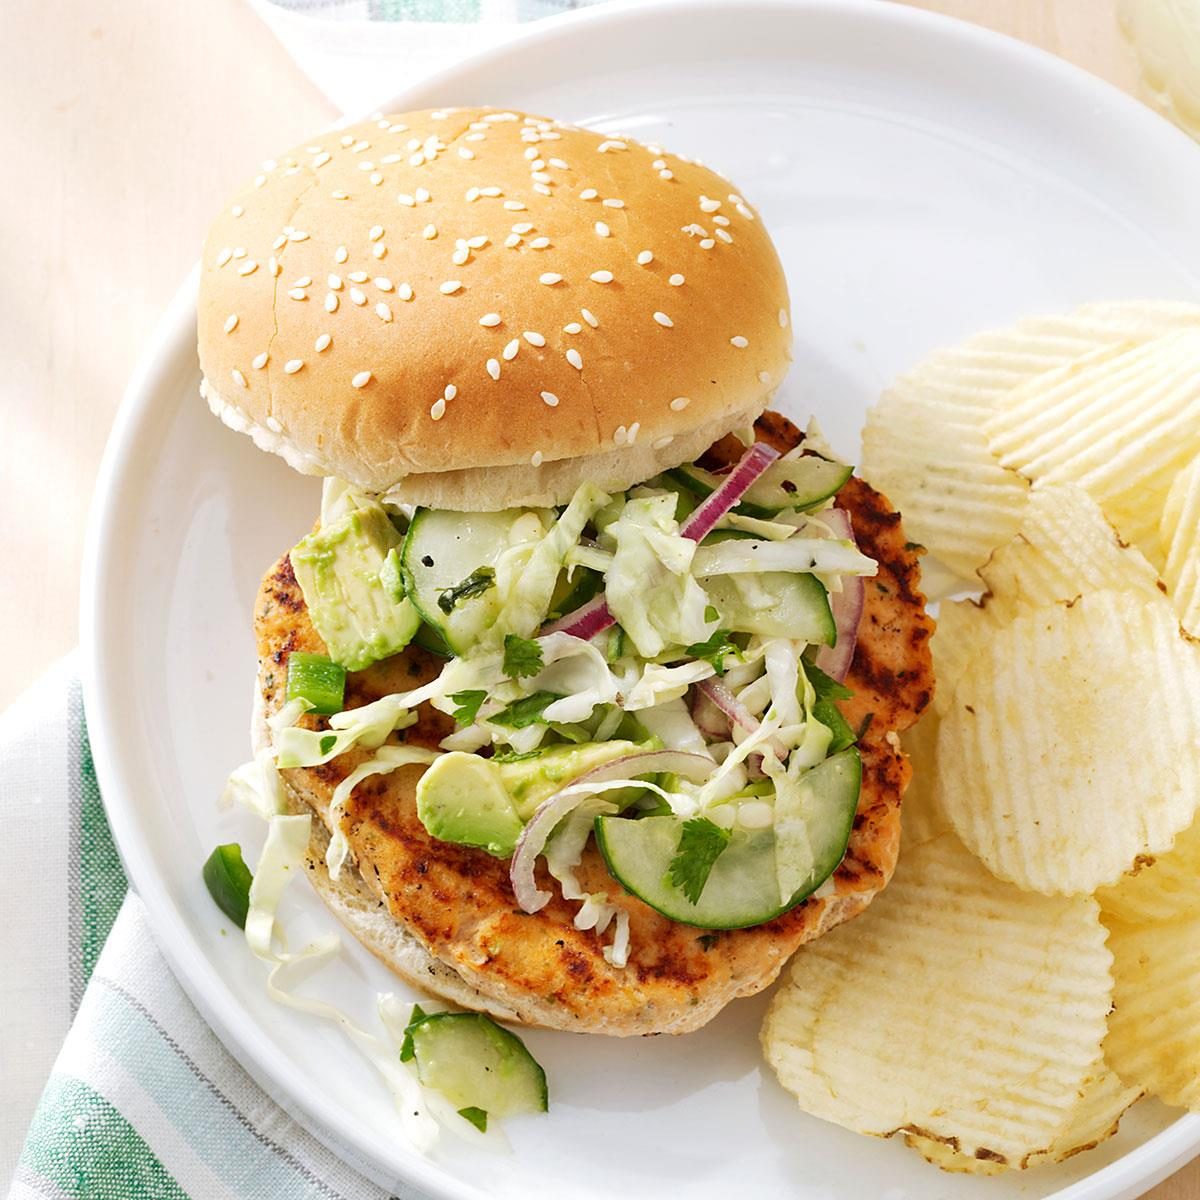 https://www.tasteofhome.com/wp-content/uploads/2017/09/Salmon-Burgers-with-Tangy-Slaw_exps162991_CW2852794C03_08_4bC_RMS.jpg